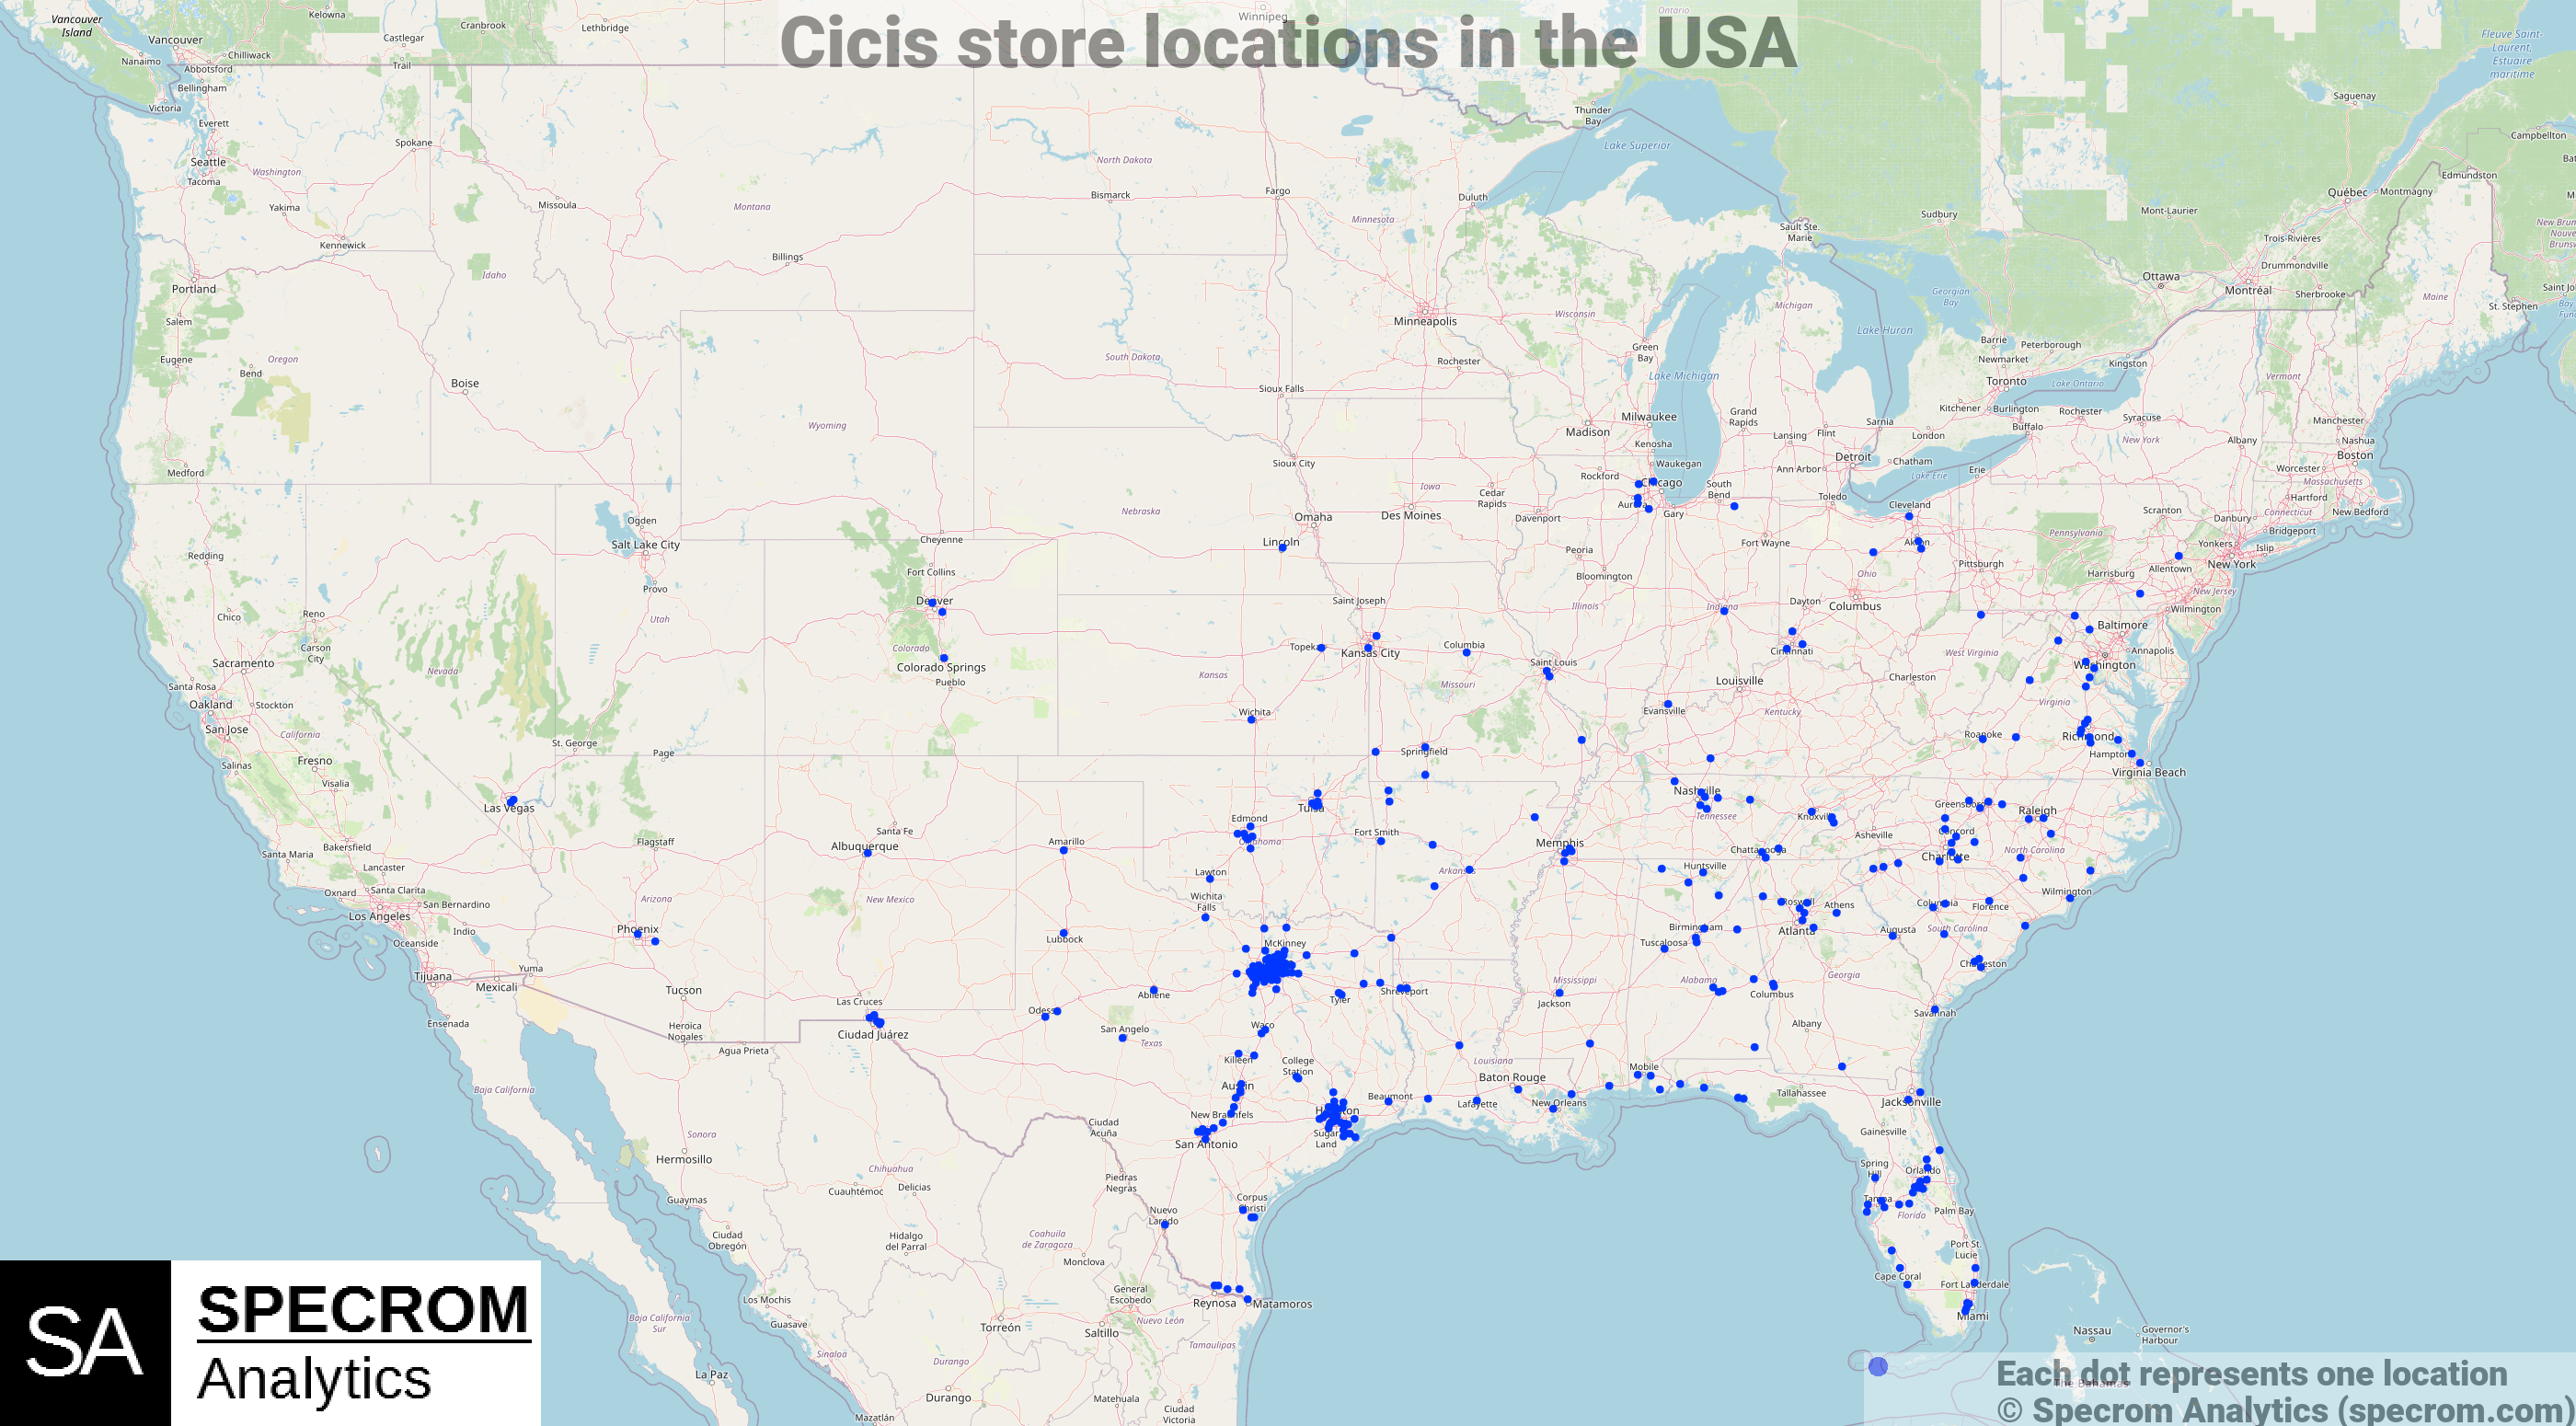 Cicis store locations in the USA